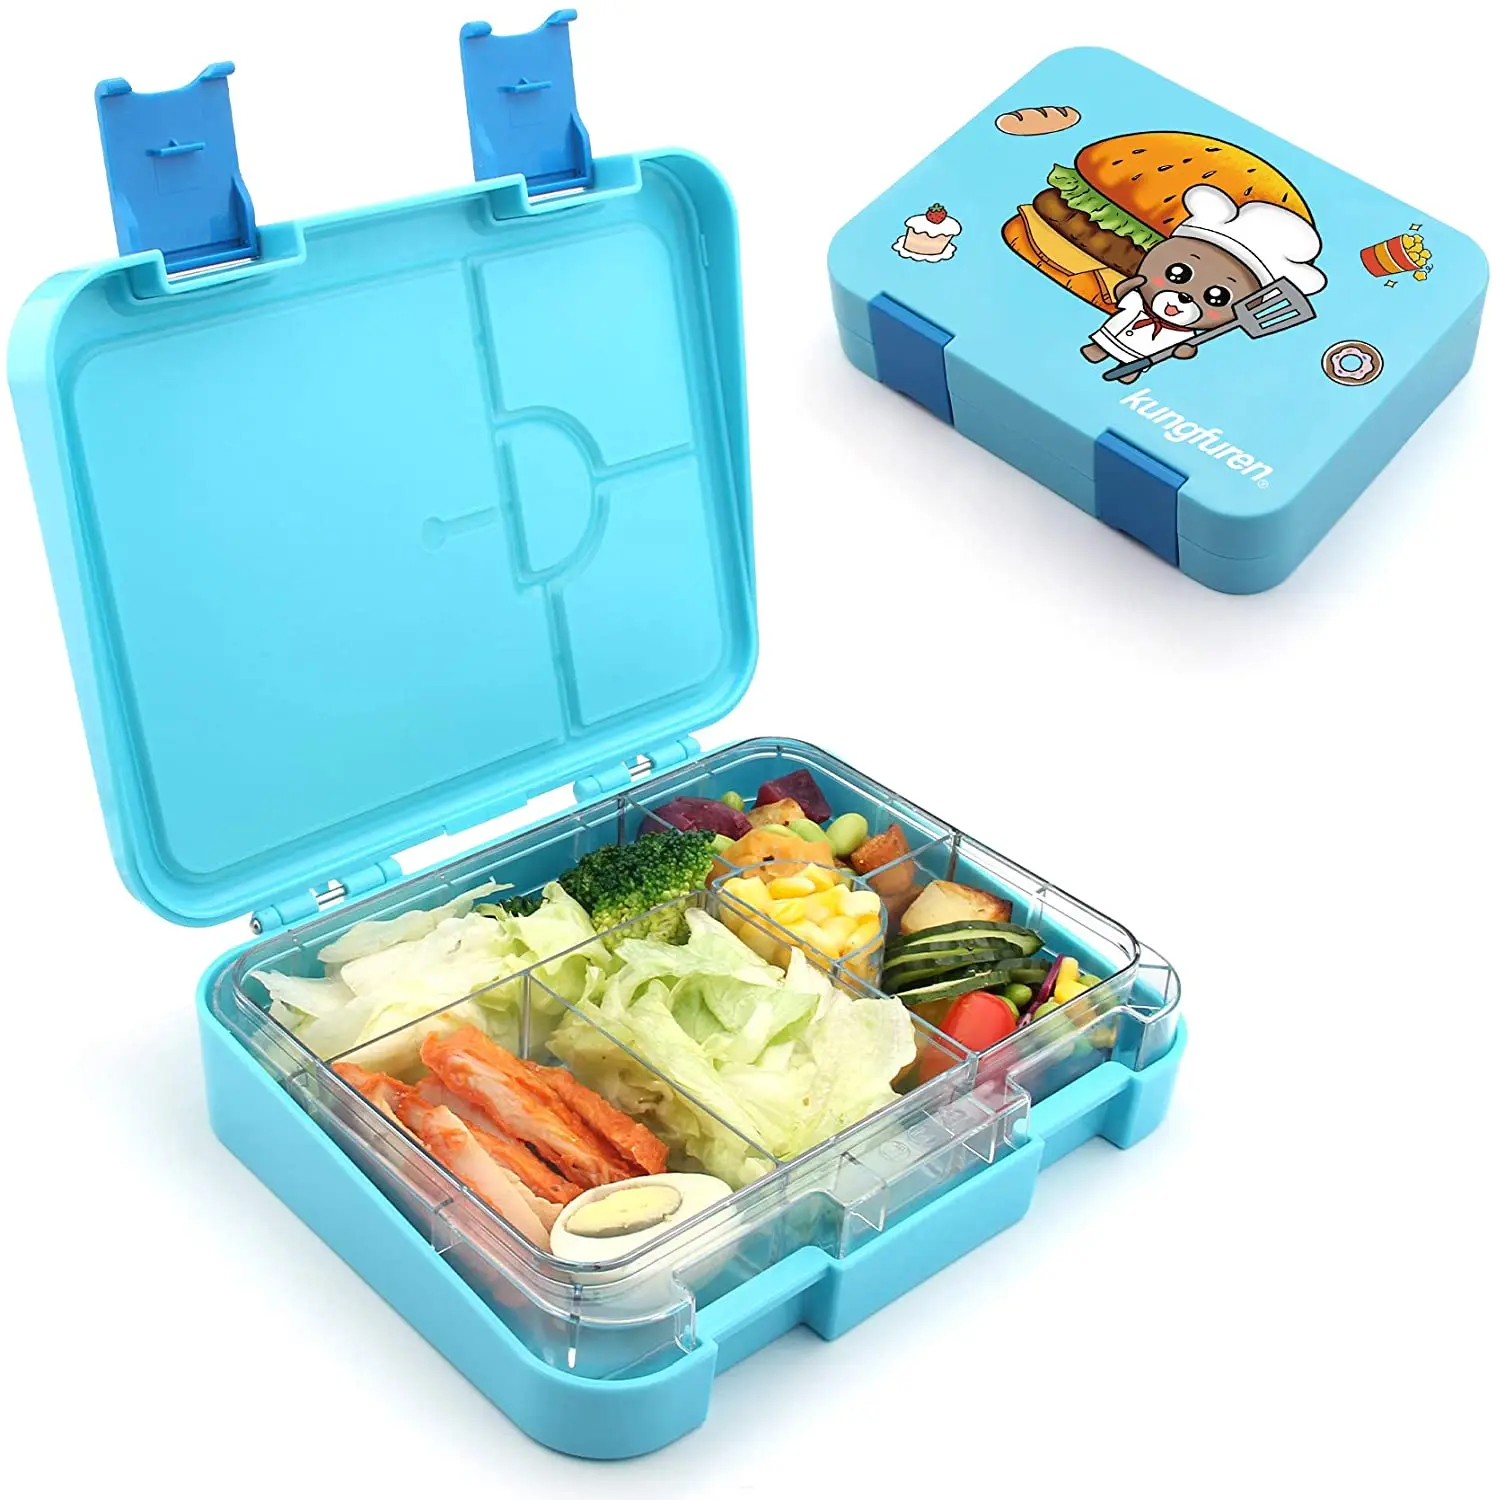 

Factory Wholesale Lunchbox 2021 Enhanced microwave 6 Compartment plastic bento lunch box for kids, Customized